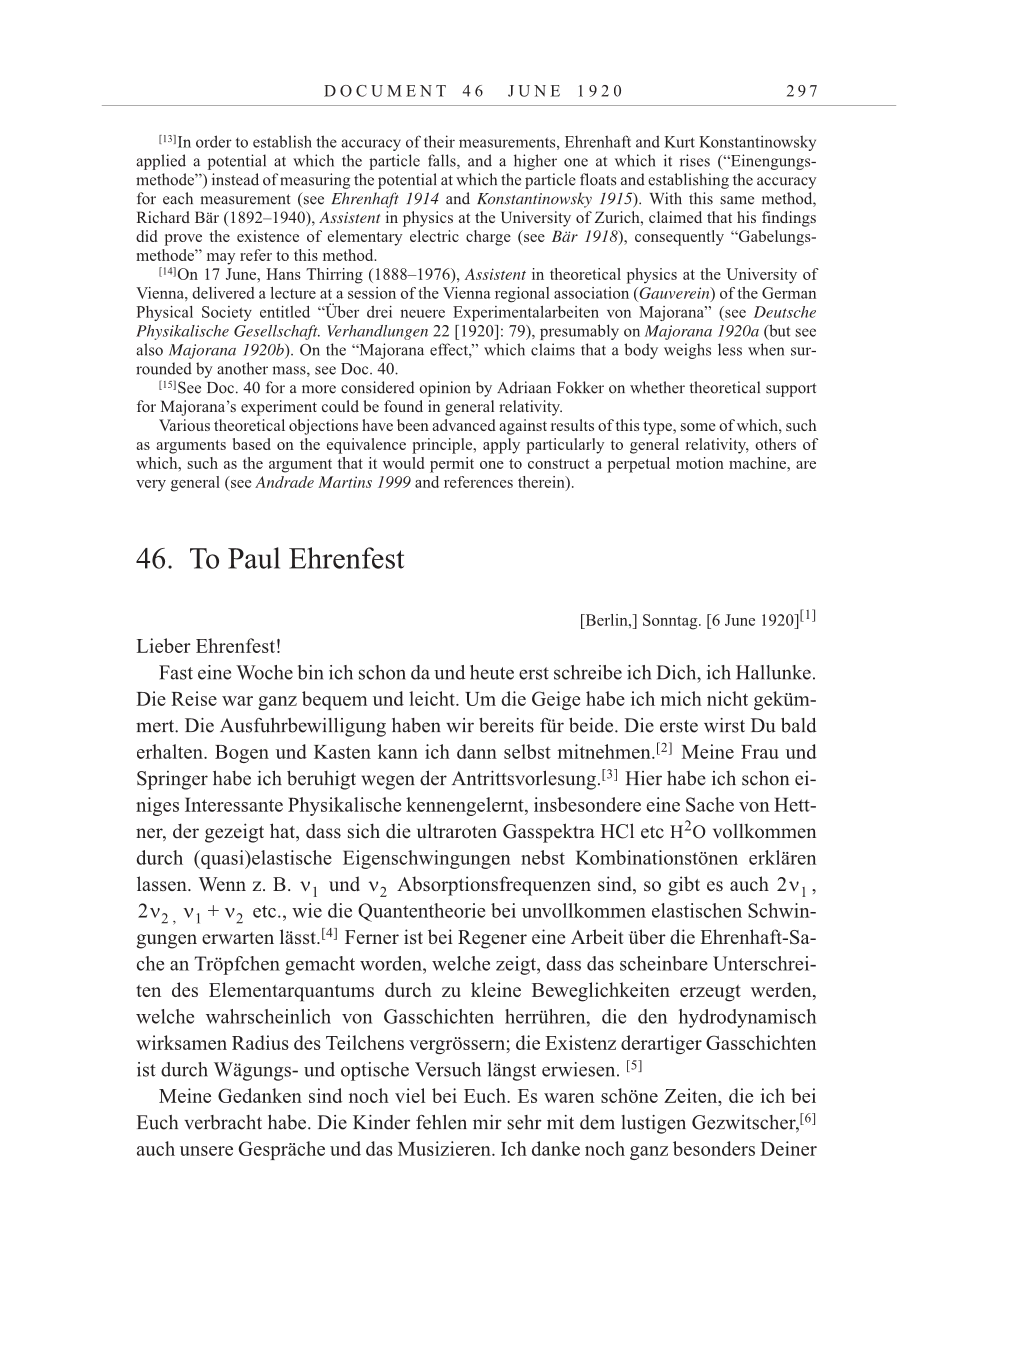 Volume 10: The Berlin Years: Correspondence May-December 1920 / Supplementary Correspondence 1909-1920 page 297